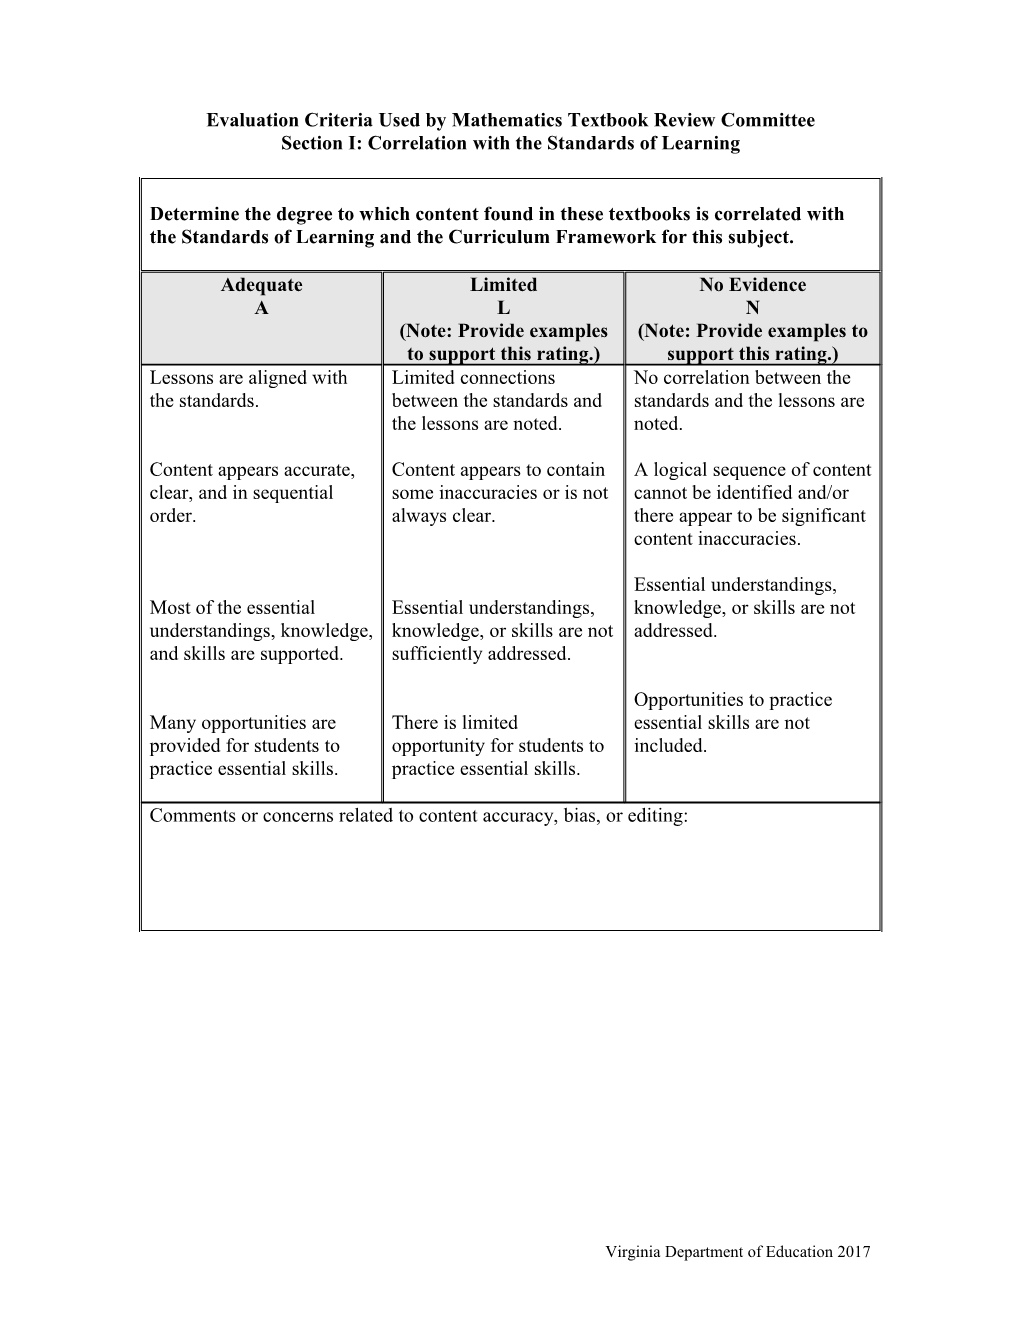 Evaluation Criteria Used by Mathematics Textbook Review Committee